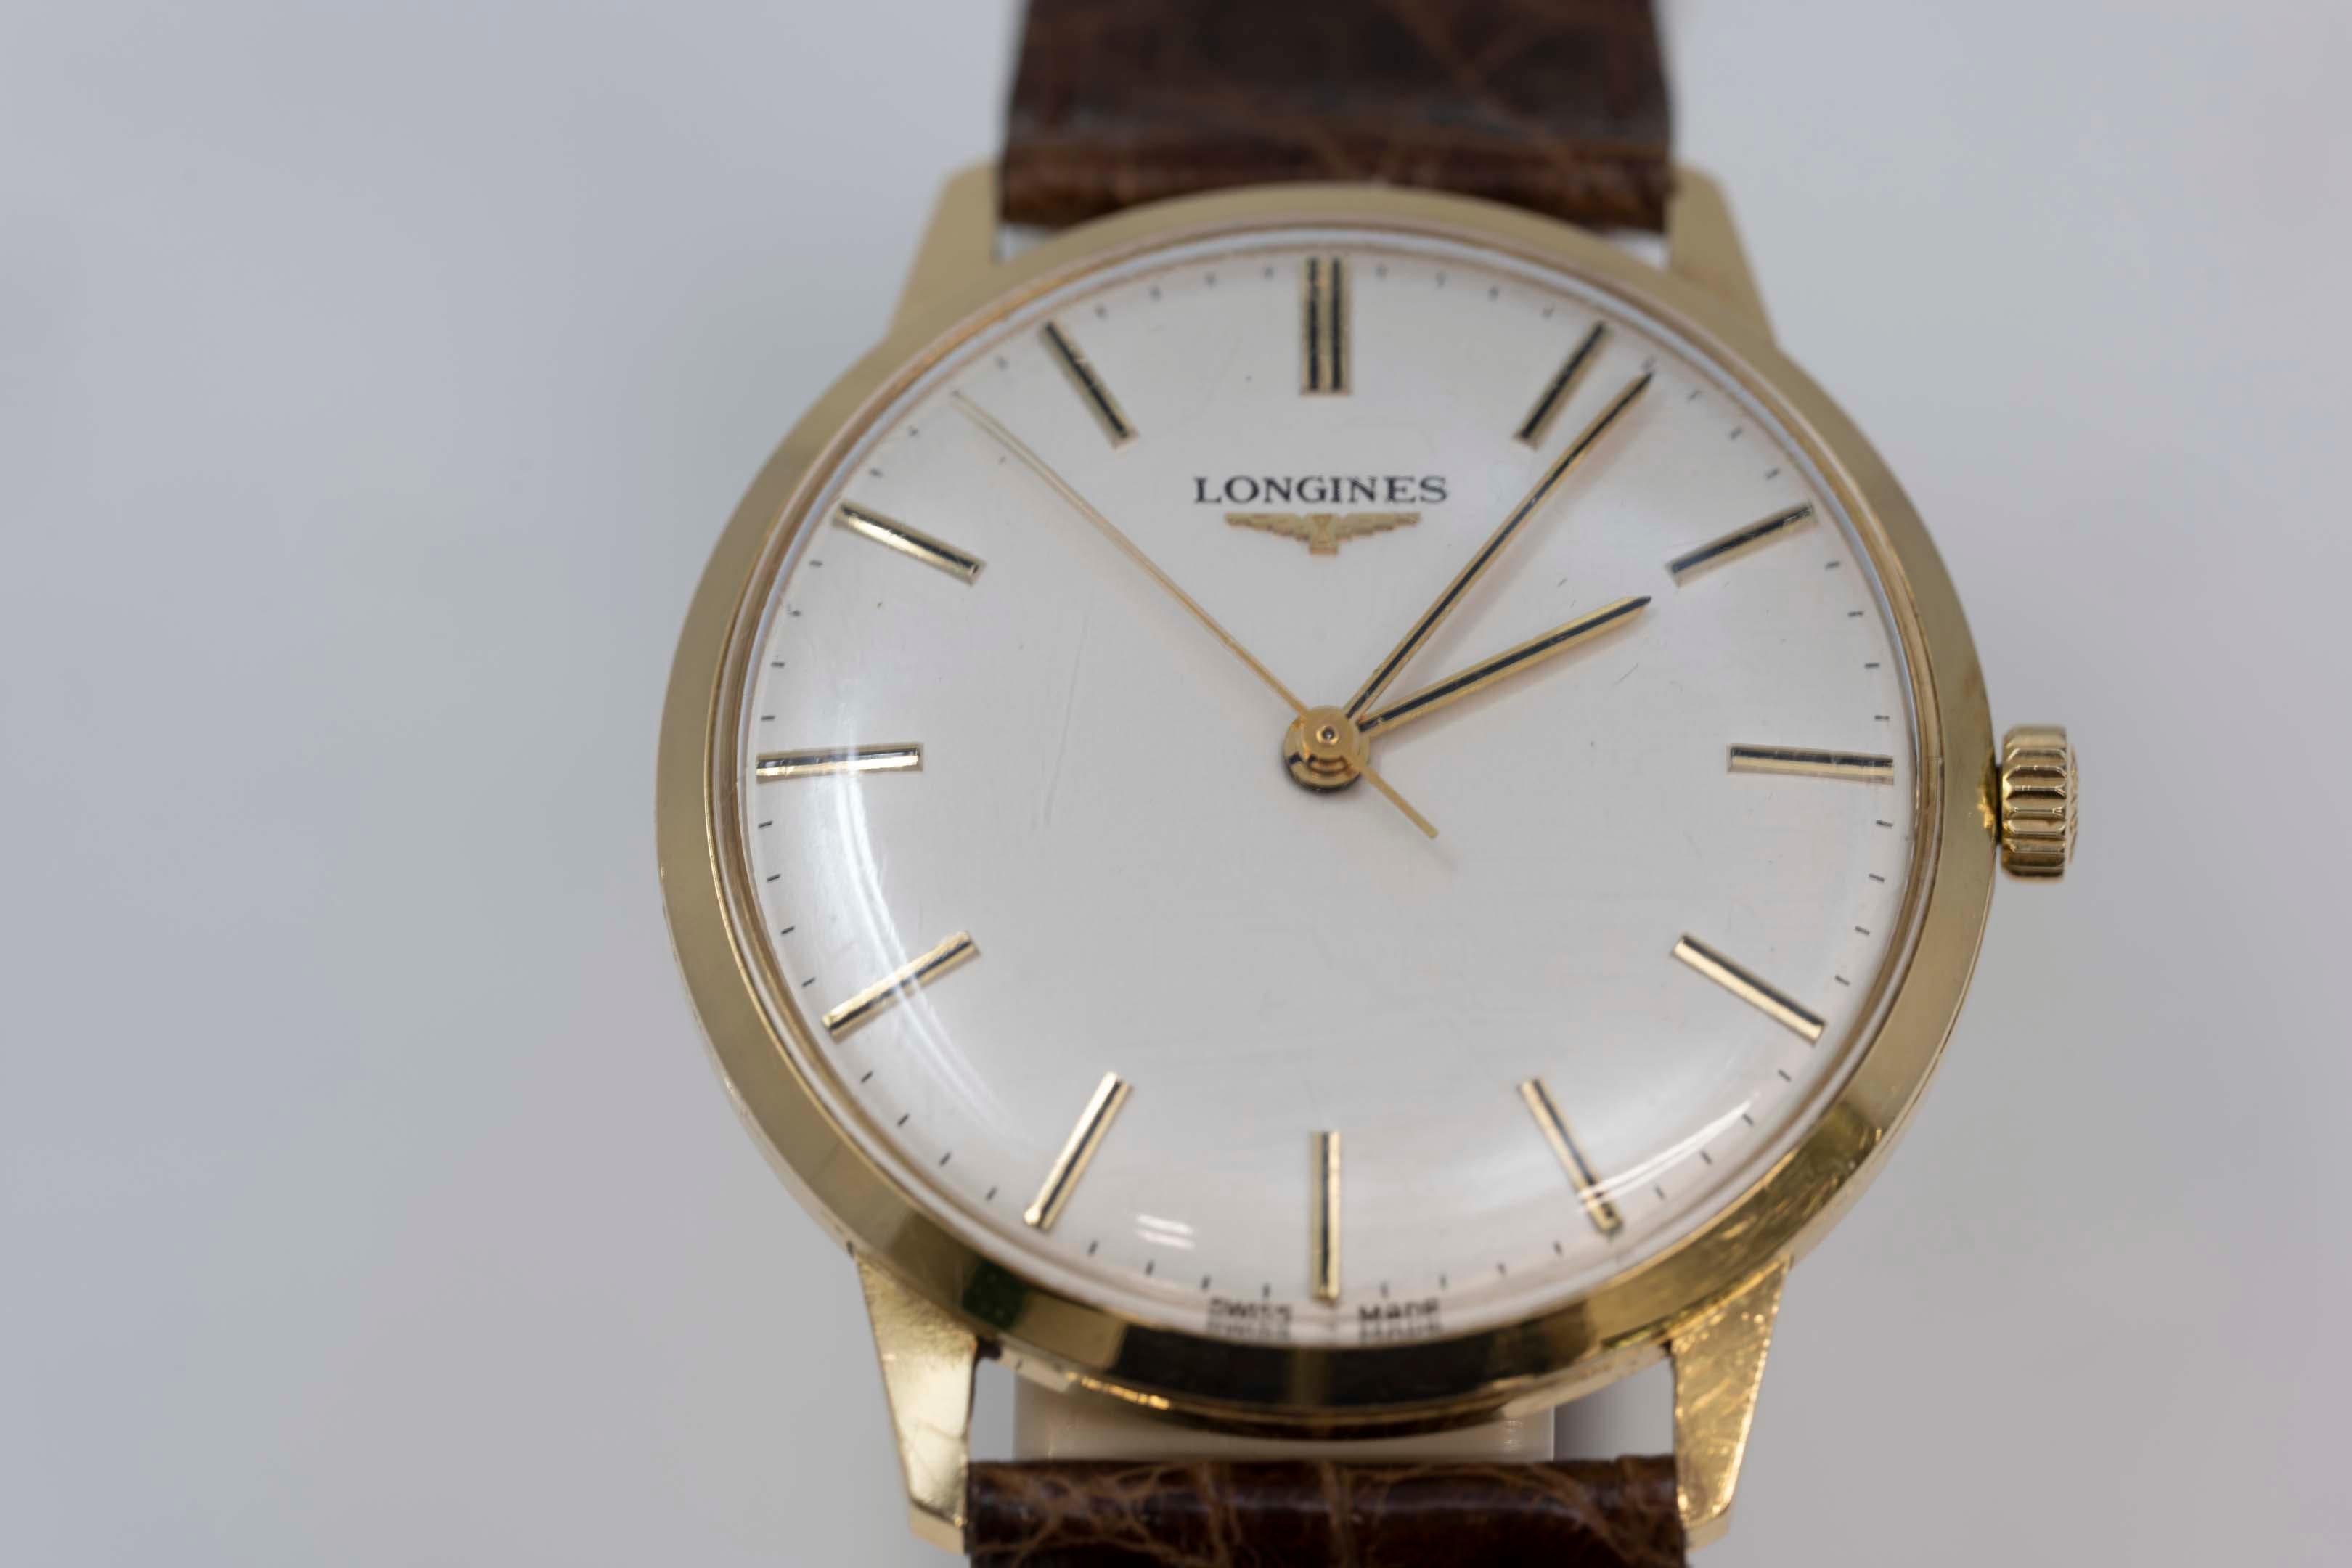 Longines 18k gold men's watch circa 1970, cal706, case 35mm excluding crown. White silver dial, 17 jewels, hand wound movement, new crocodile brown strap, no box. In good working order. Minor wear due to usage and Made in Switzerland.
